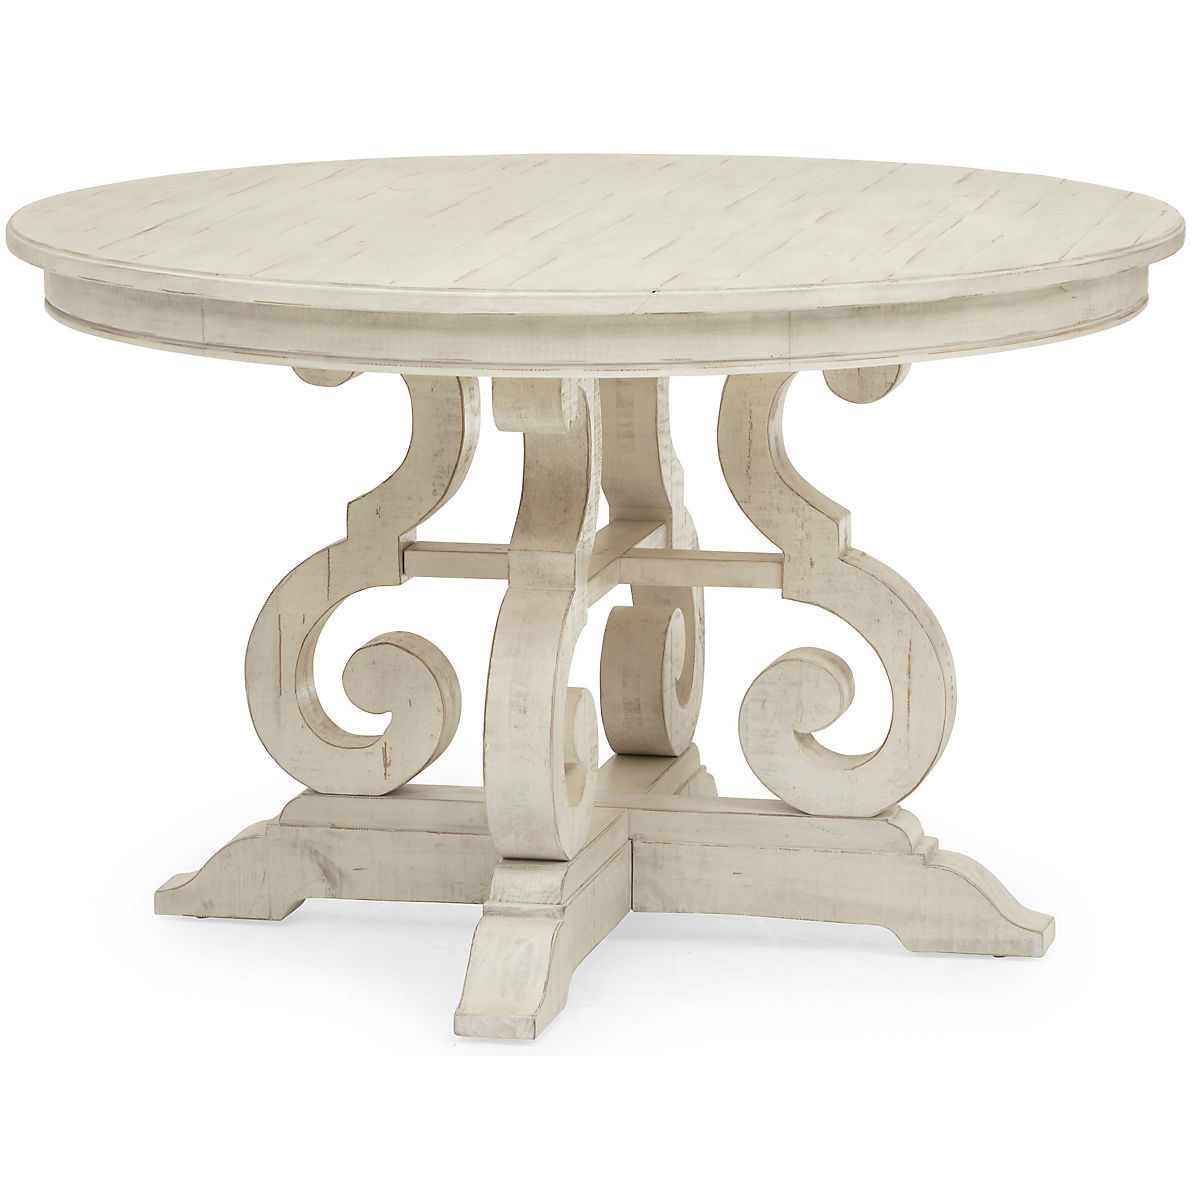 Treble 48 Inch Round Dining Table, 48 In Round Dining Table Set